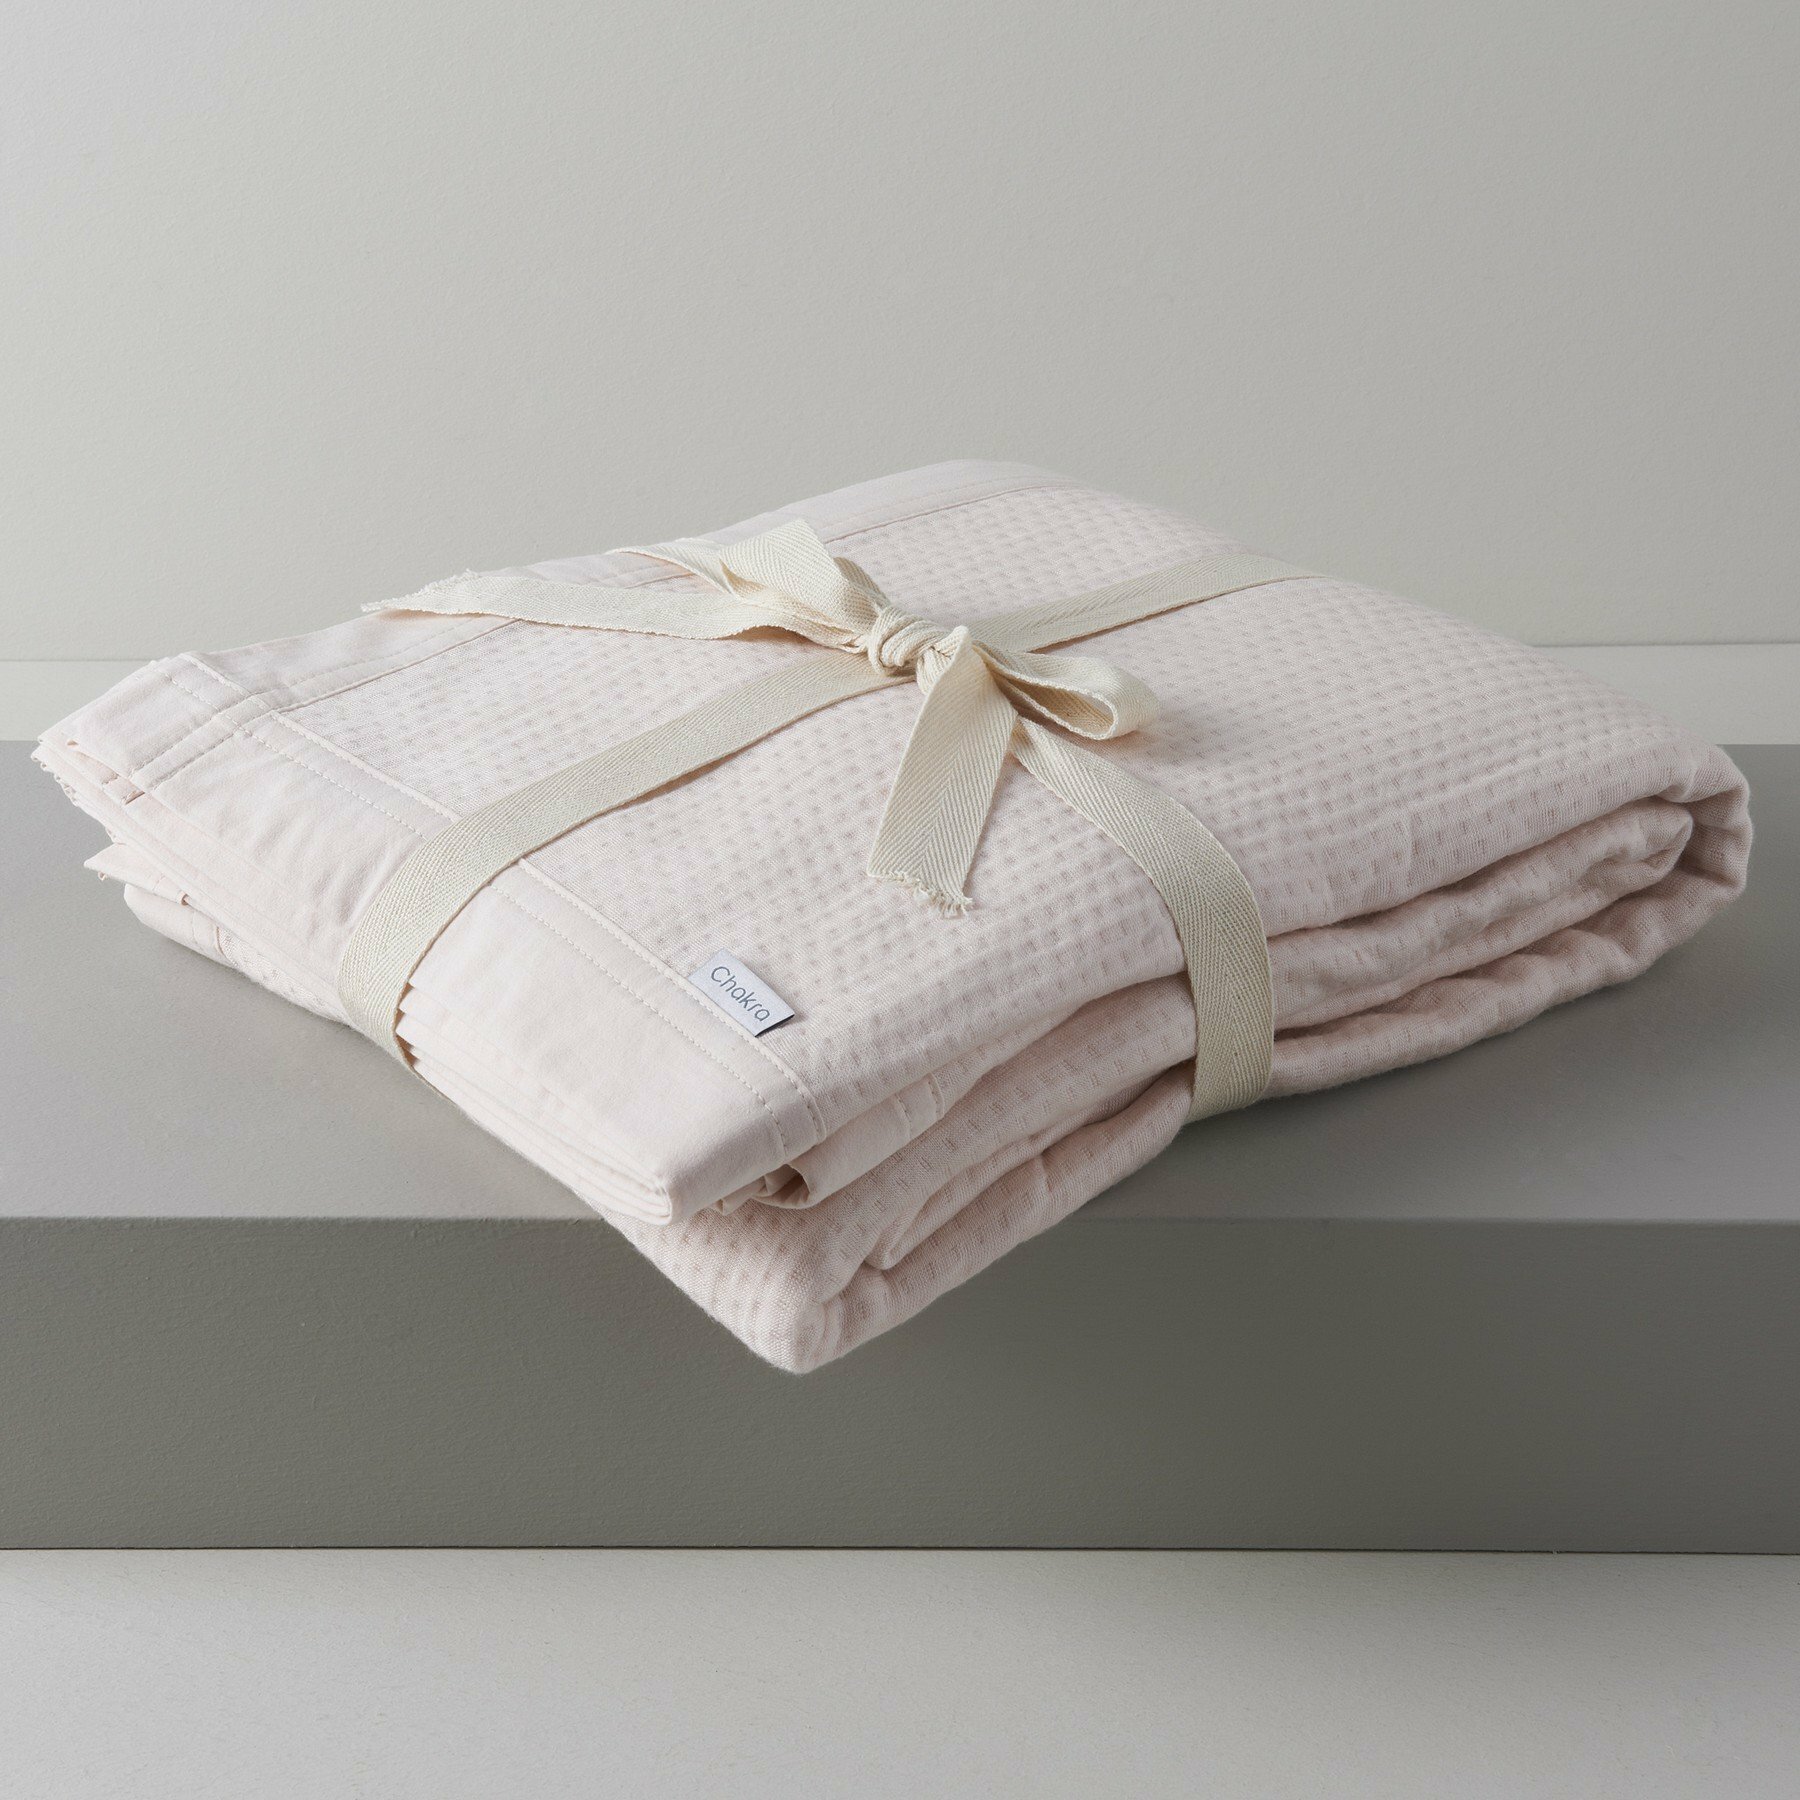 Gracie Oaks Gira 100 Rayon From Bamboo Extremely Soft Baby Blanket Wayfair